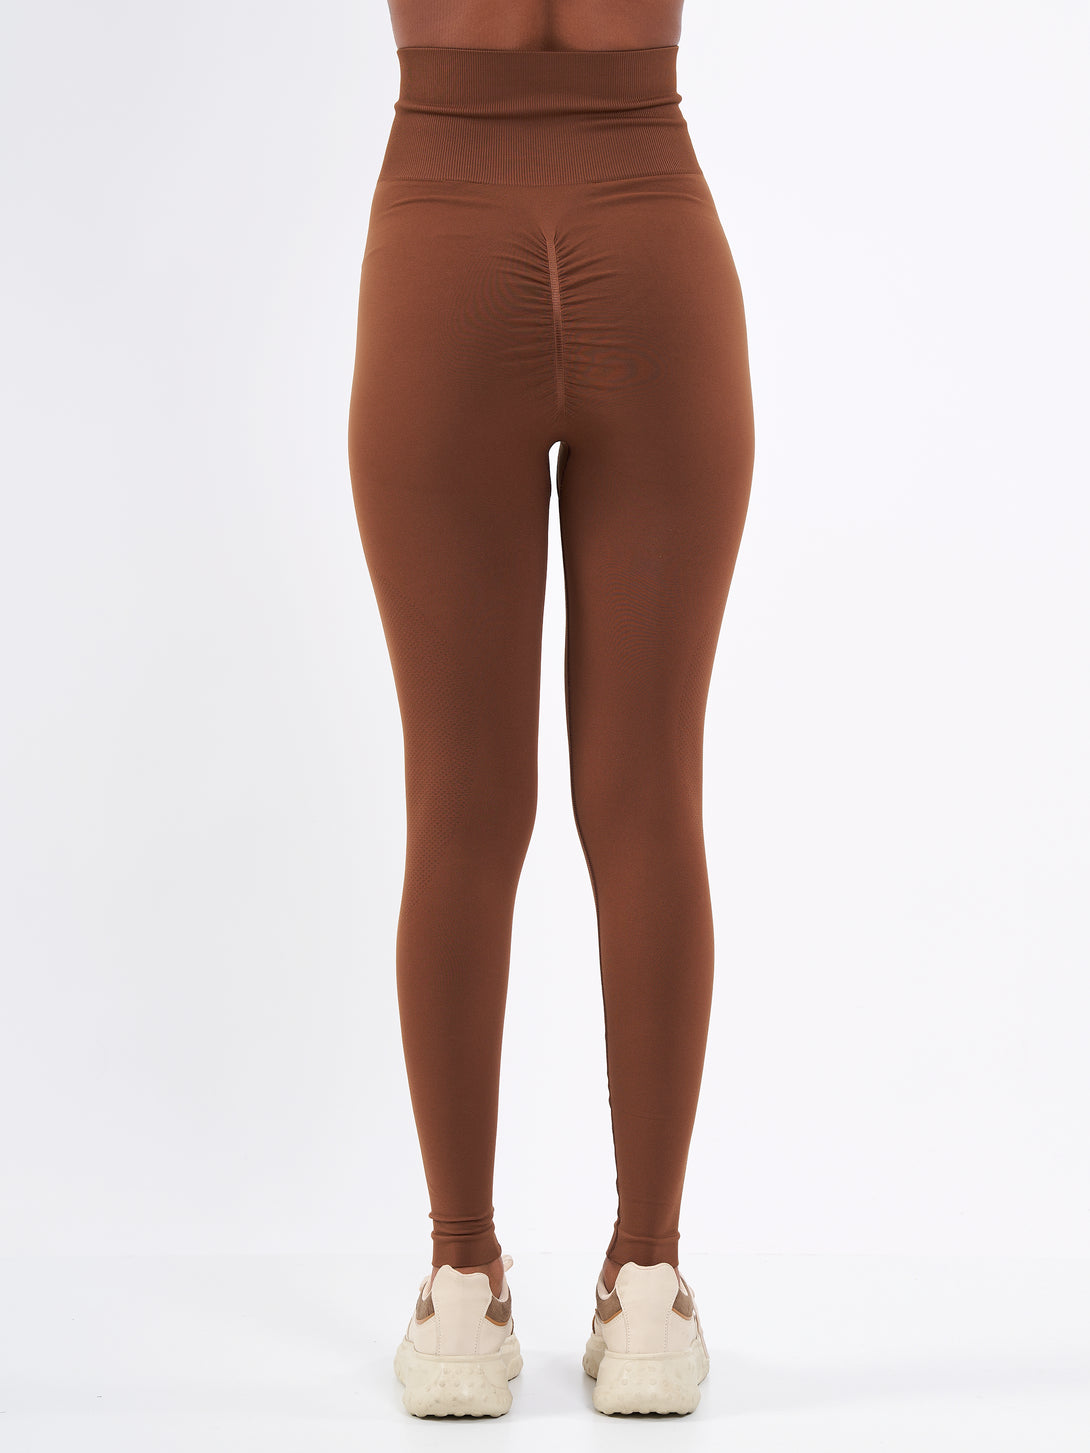 A Women Wearing Toffe Brown Color Zen Confidence Seamless Compressive Leggings. Body-Shaping